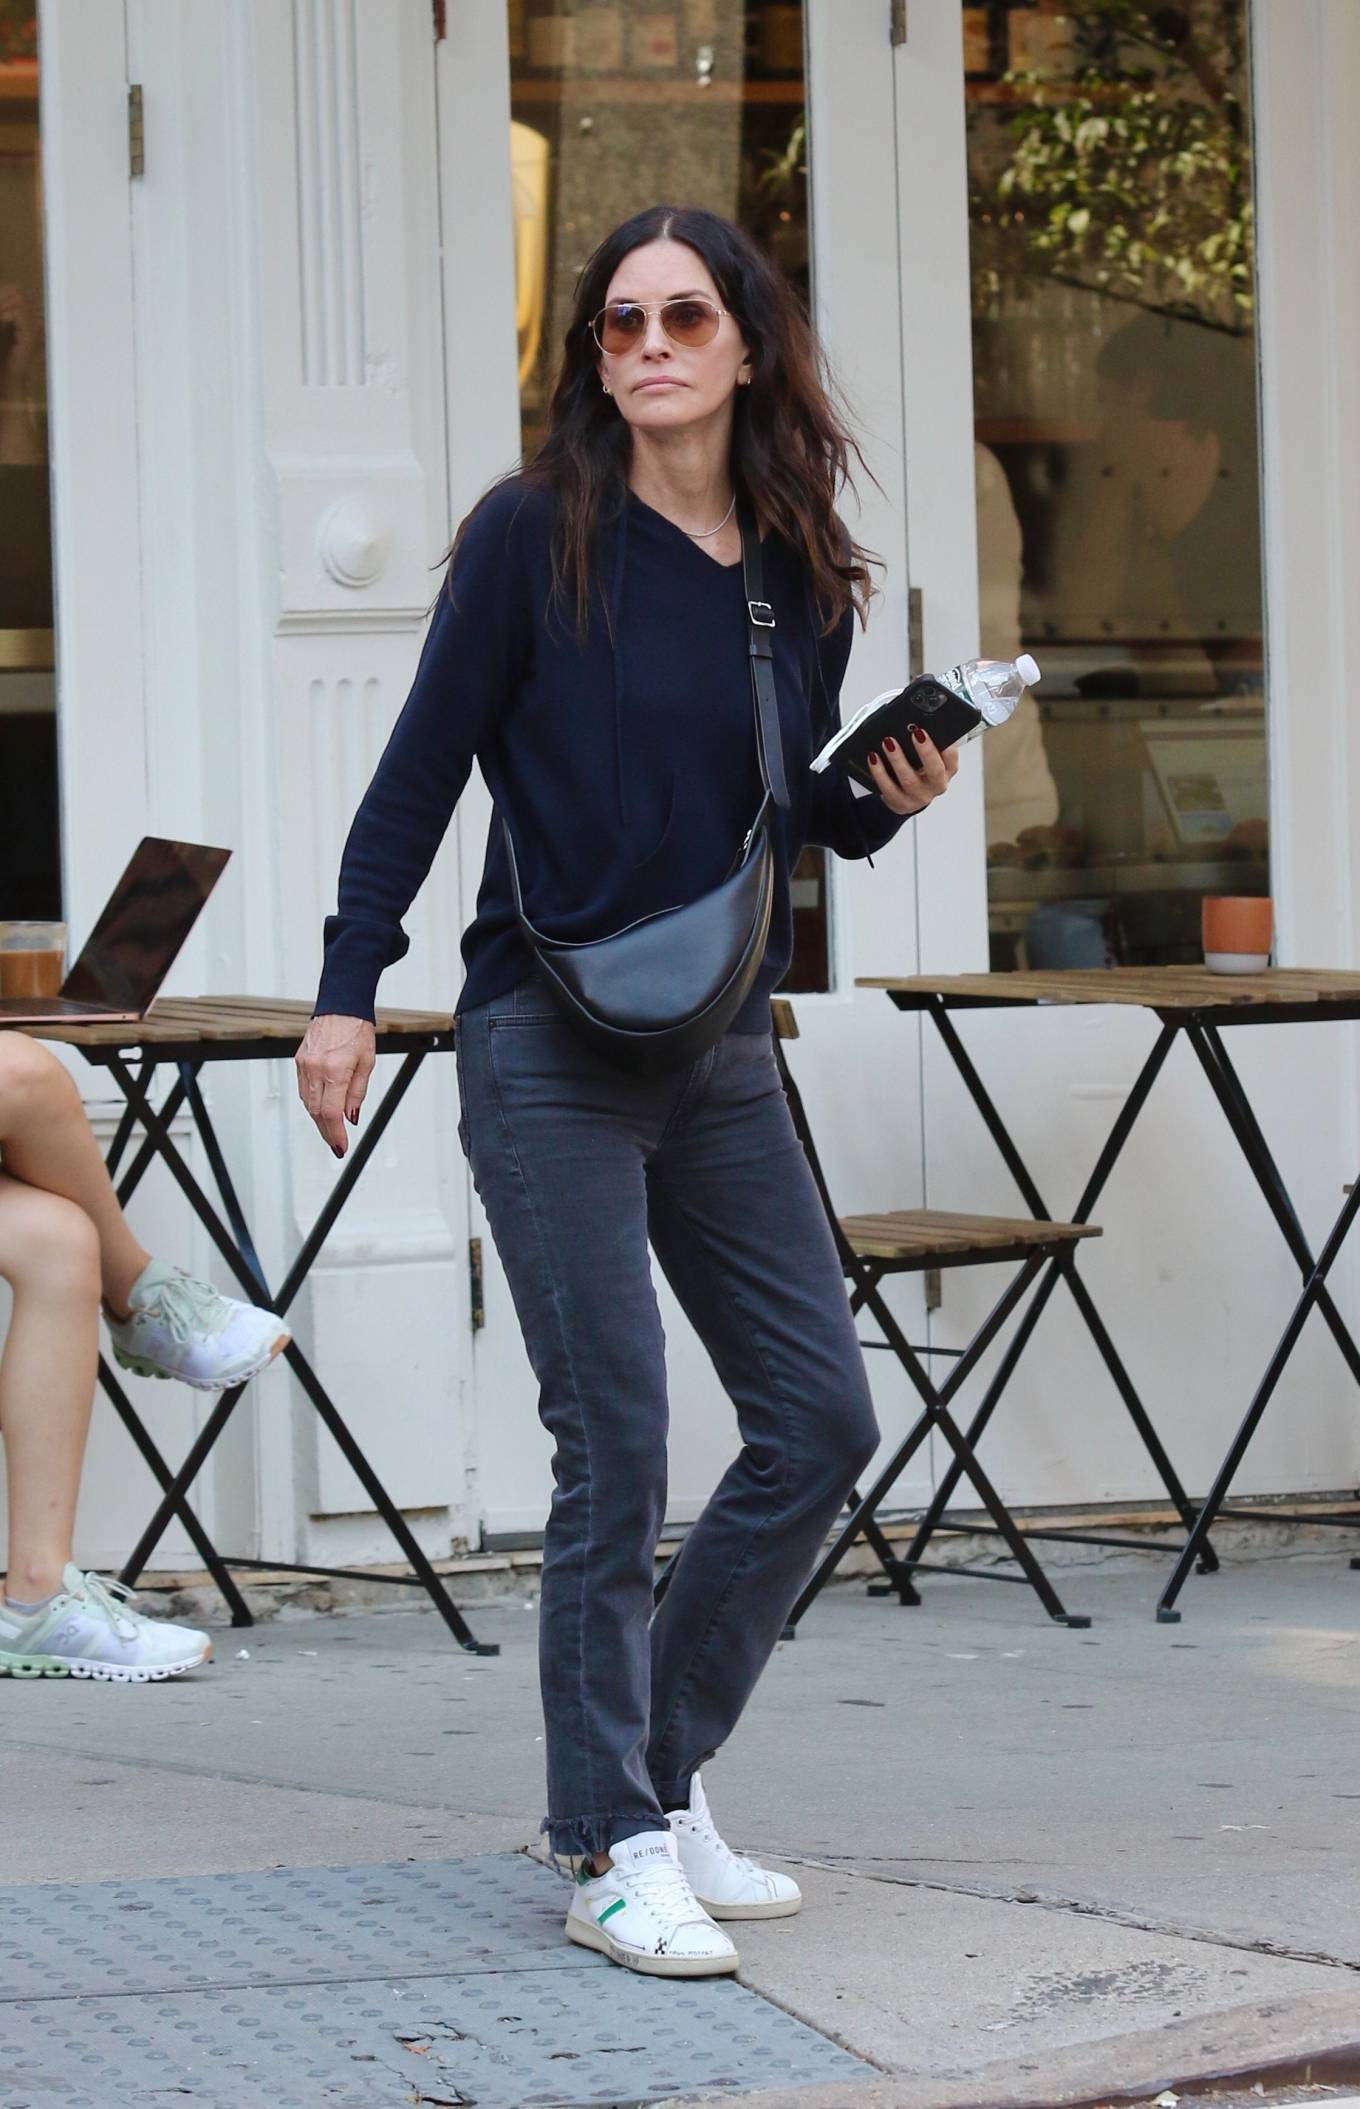 Courteney Cox 2021 : Courteney Cox – Steps out for lunch with friends in New York City-05